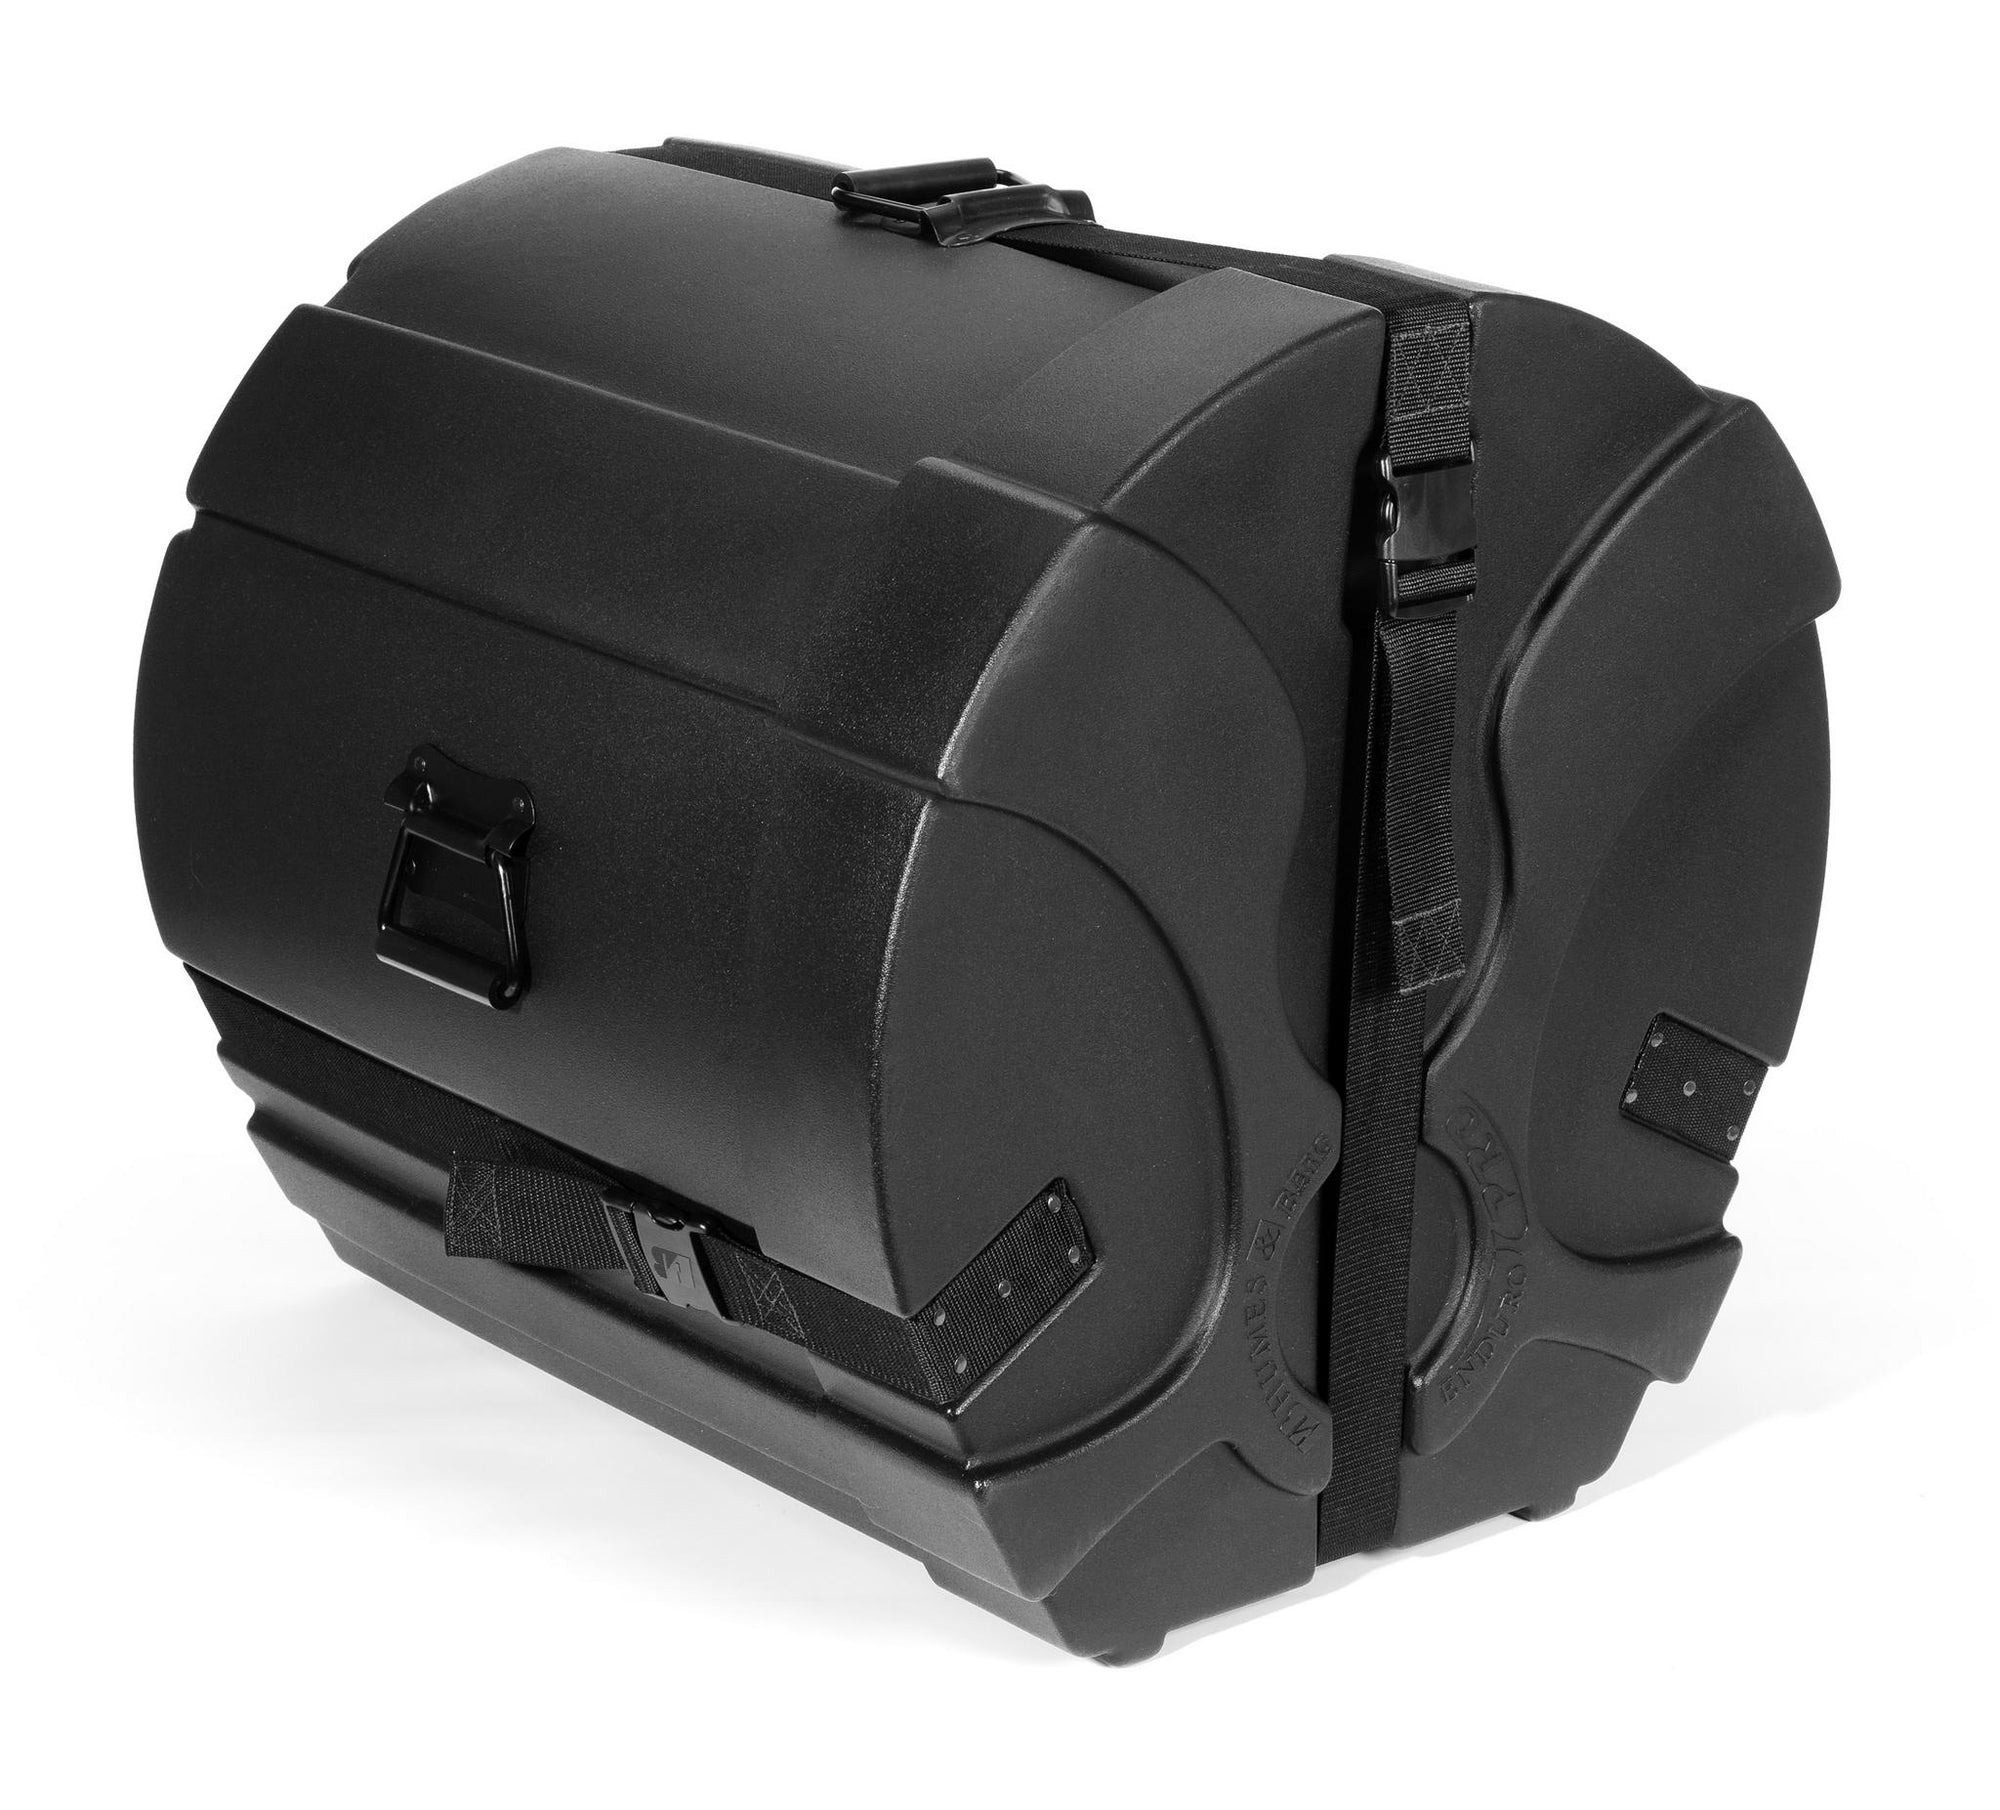 H&B Enduro Pro 16 x 20 Inches Bass Drum Case - Black with Pro Lining